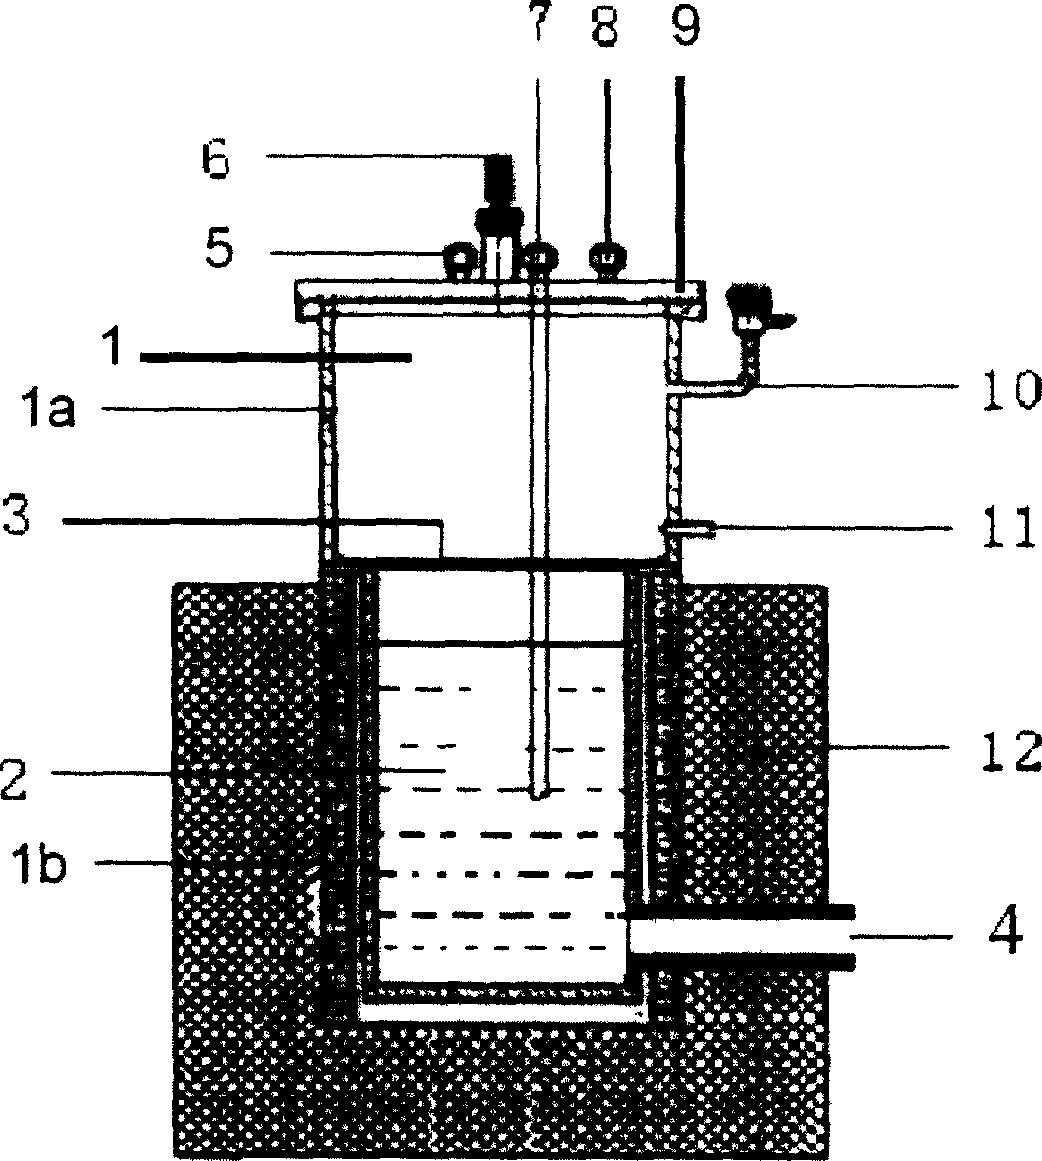 Mg alloy vacuum sealing smelter and method for preventing Mg alloy from oxidation burning